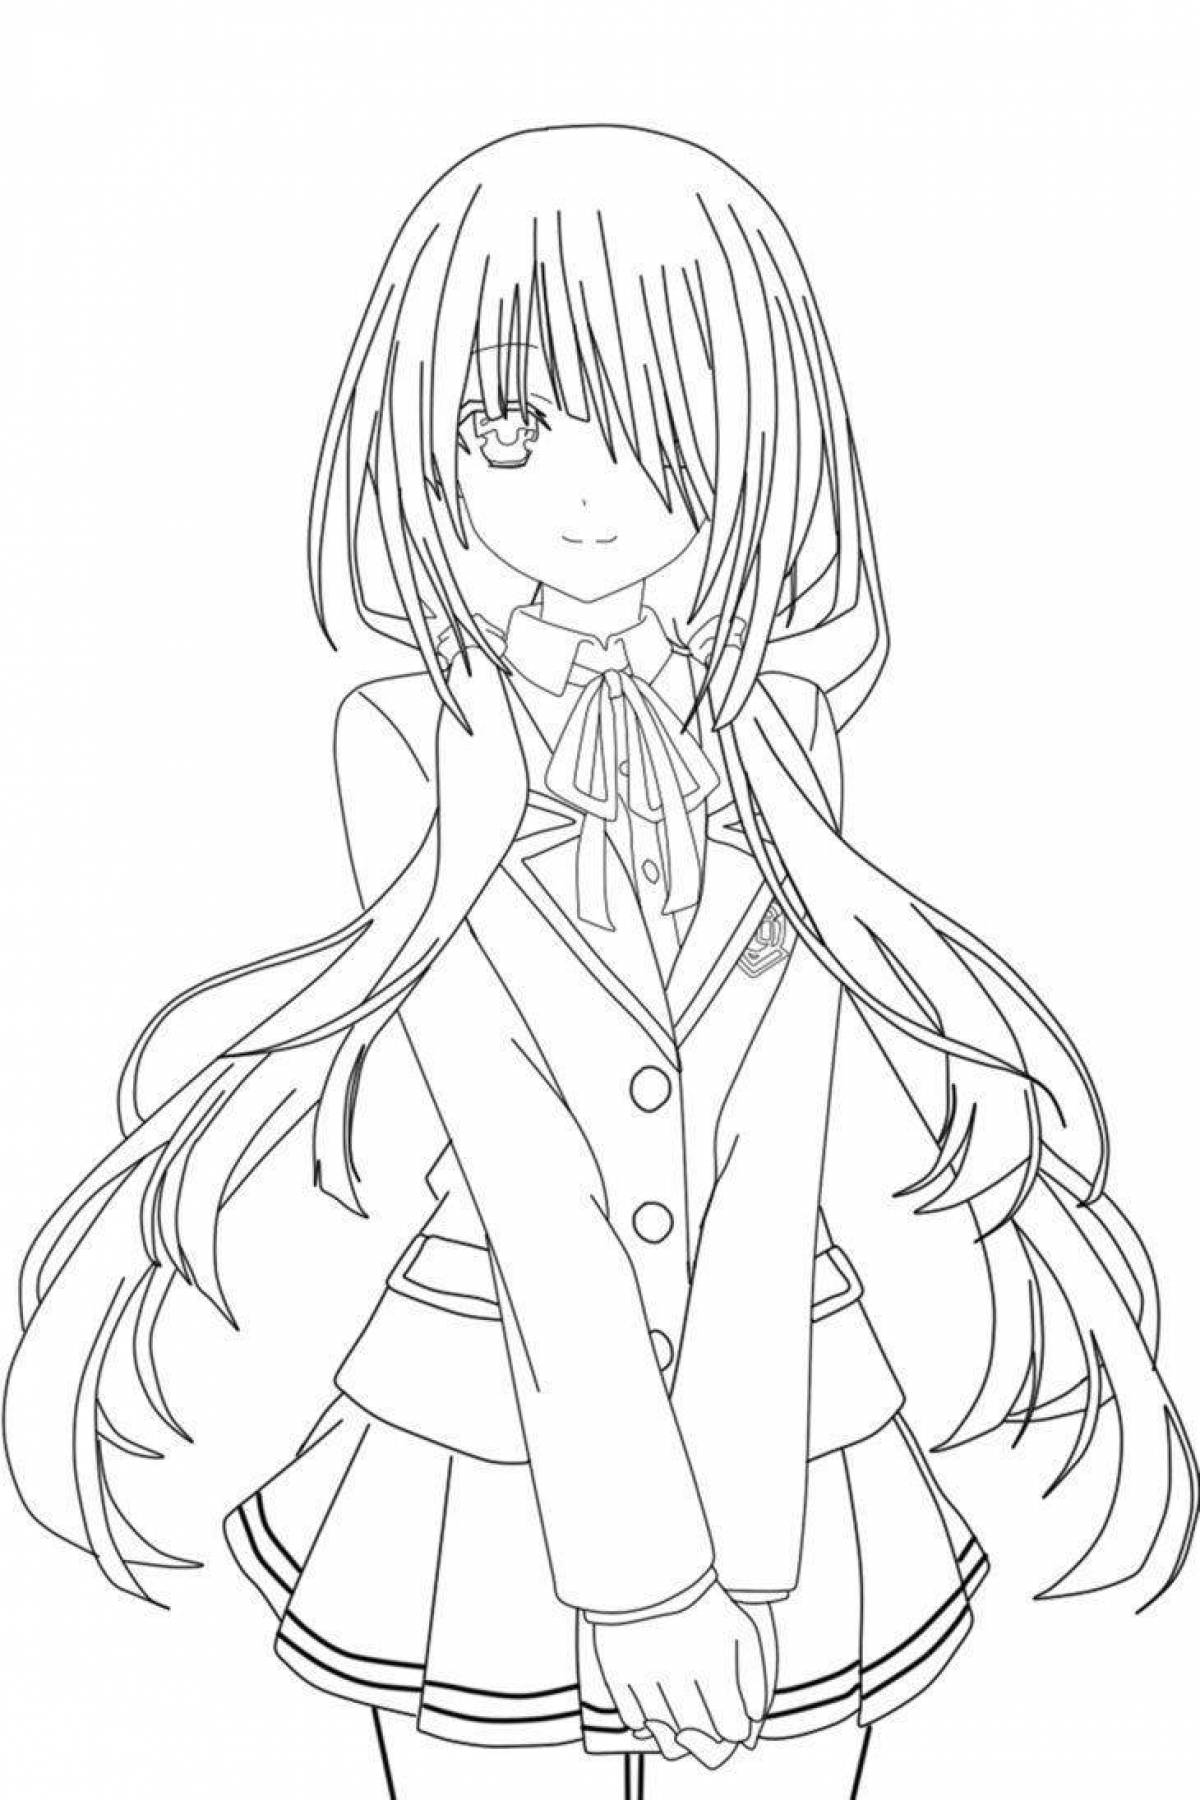 Anime chan fairytale coloring page